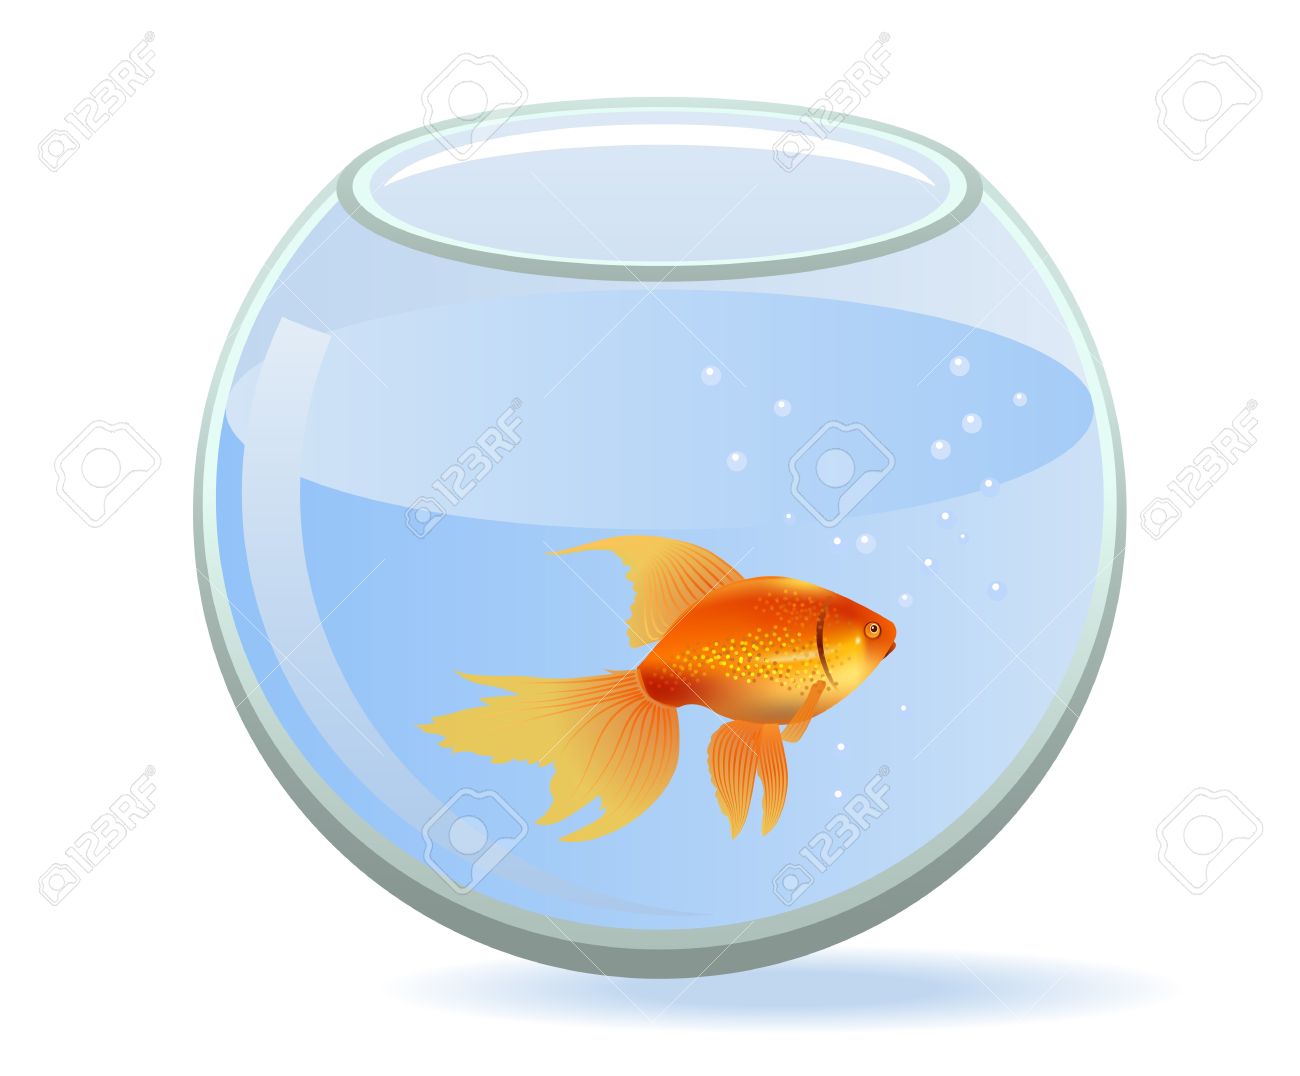 clipart of fish bowl - photo #28